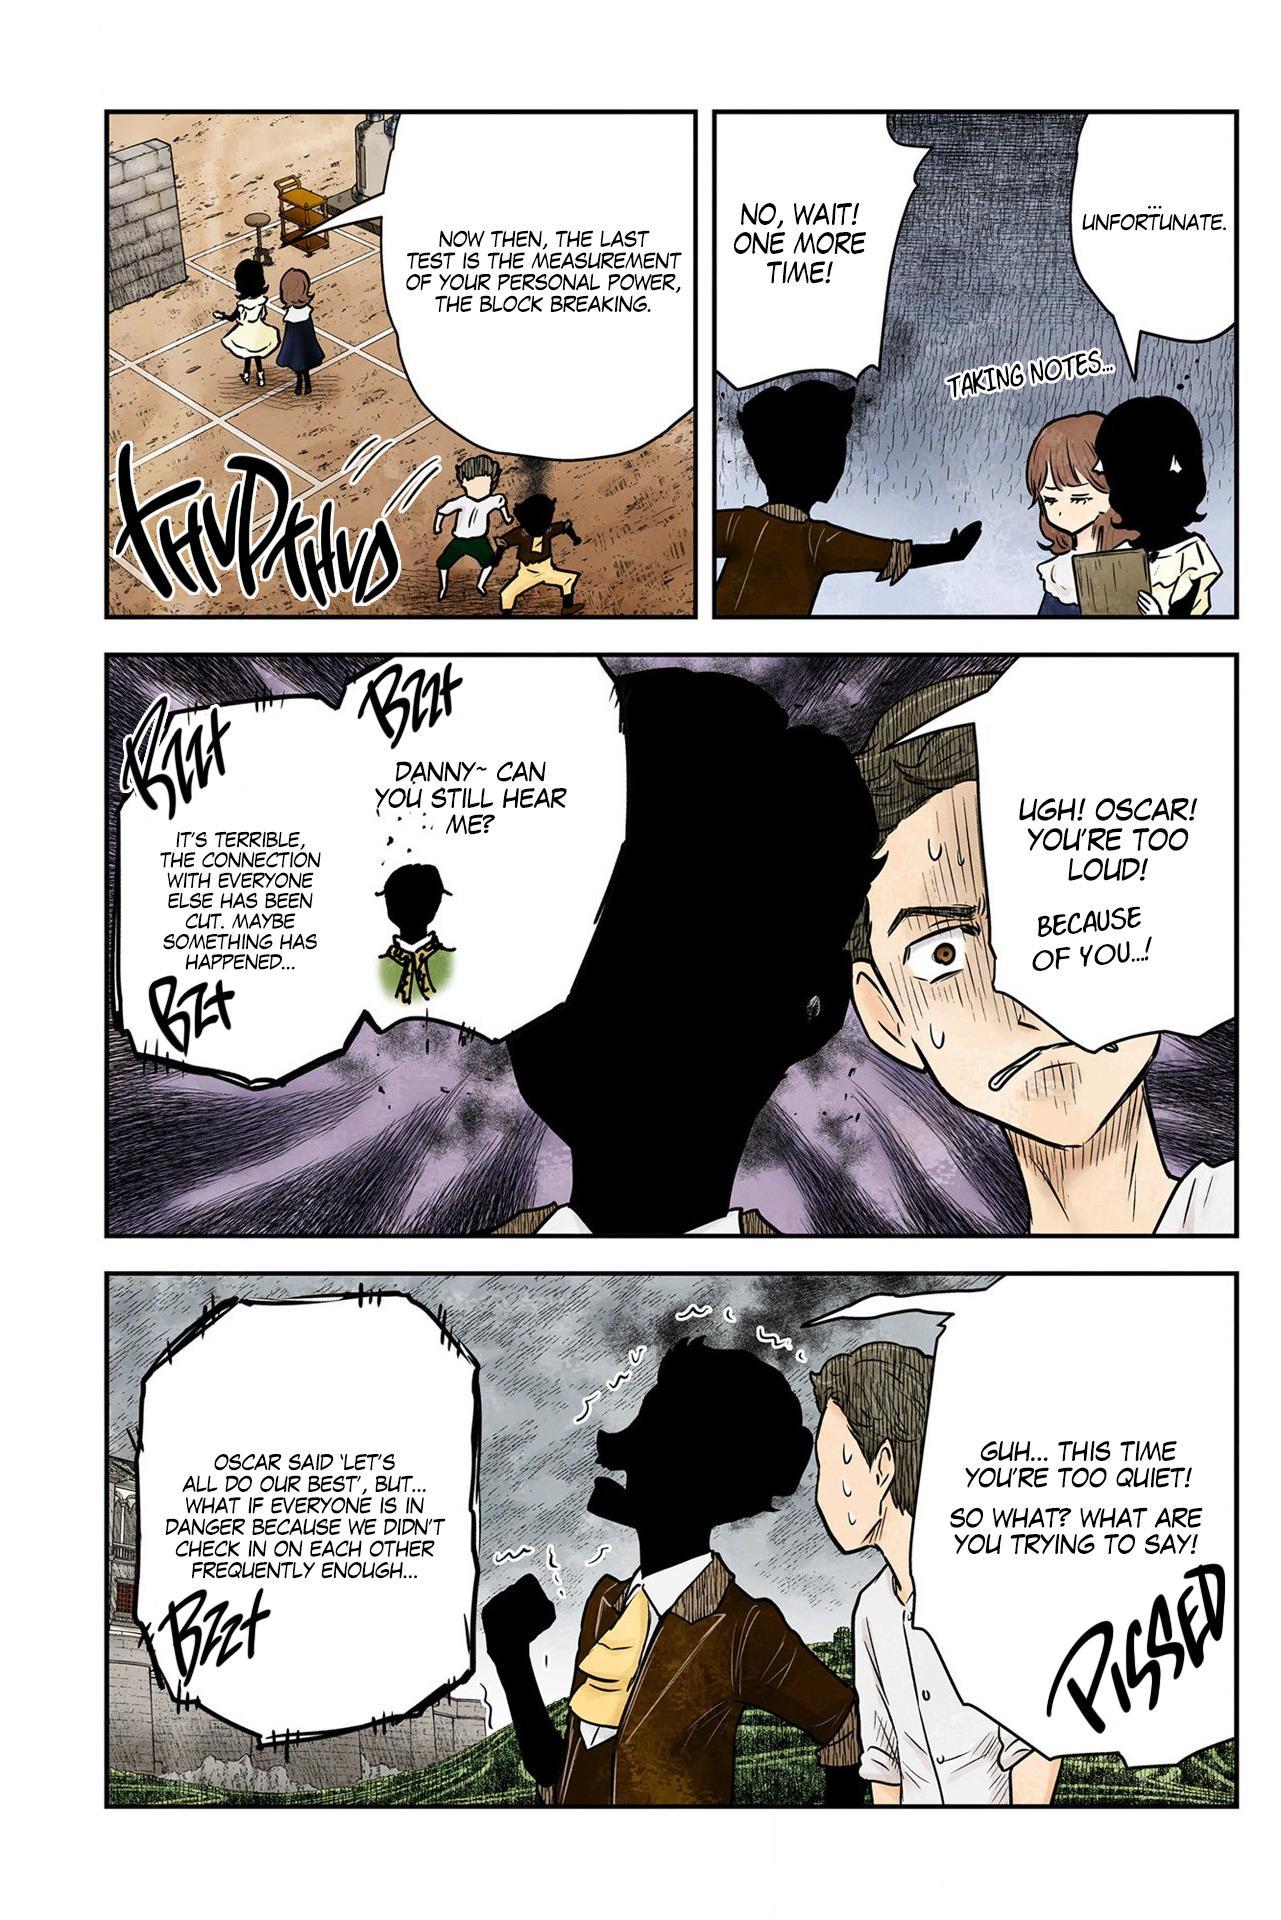 Can you guys give me manga/ manhwa recommendations that are similar to The  Promised Neverland and Shadow House? : r/ShadowsHouse